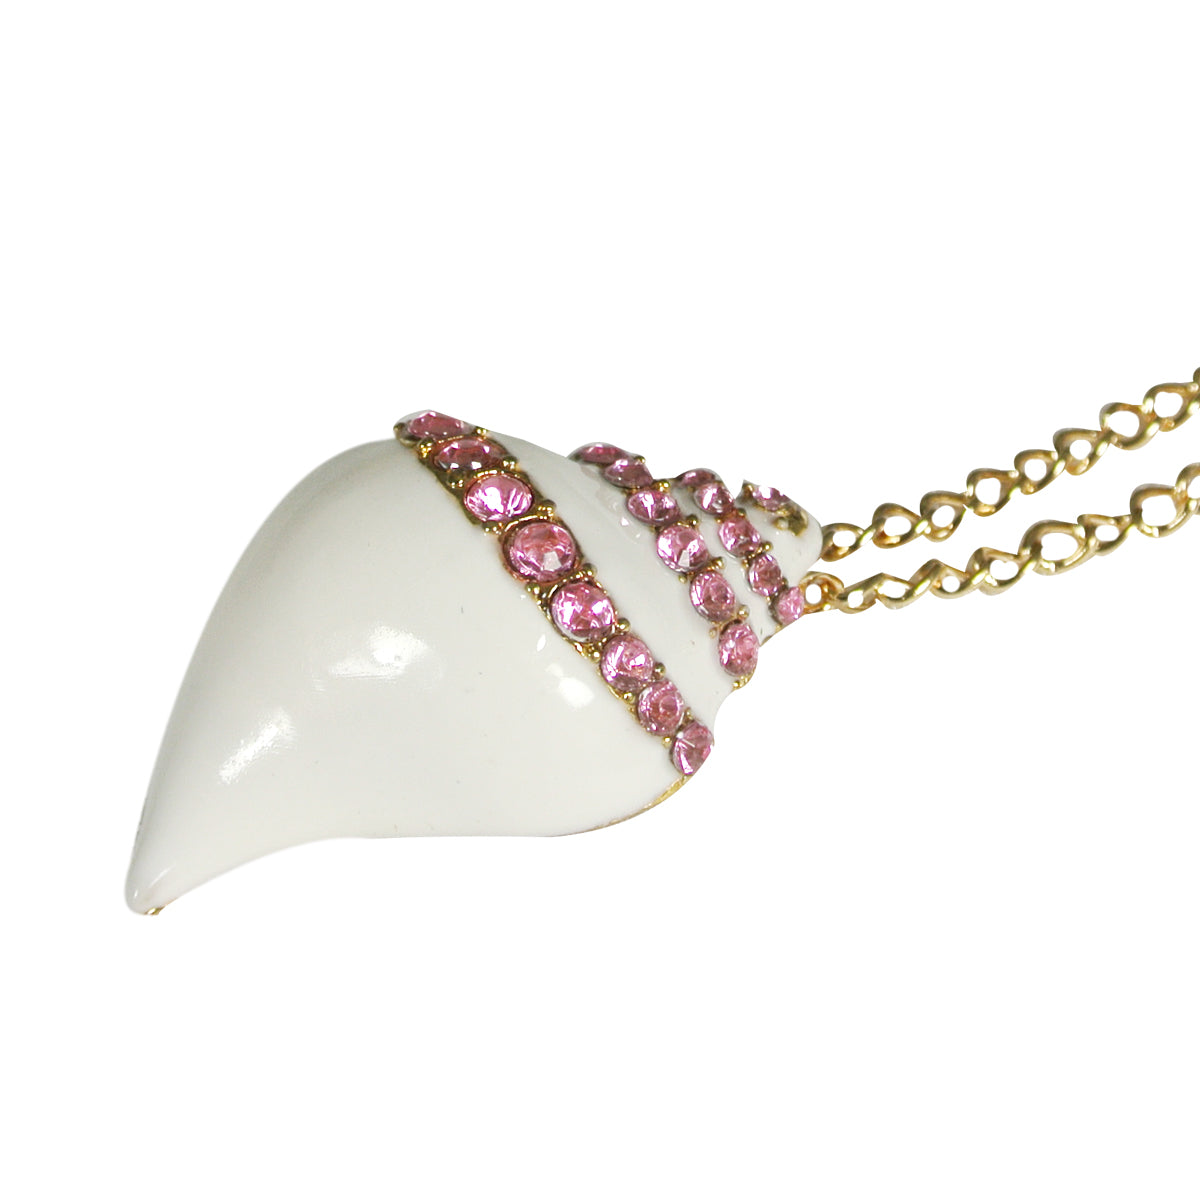 Conch Seashell Pendant Necklace with Pink Crystals